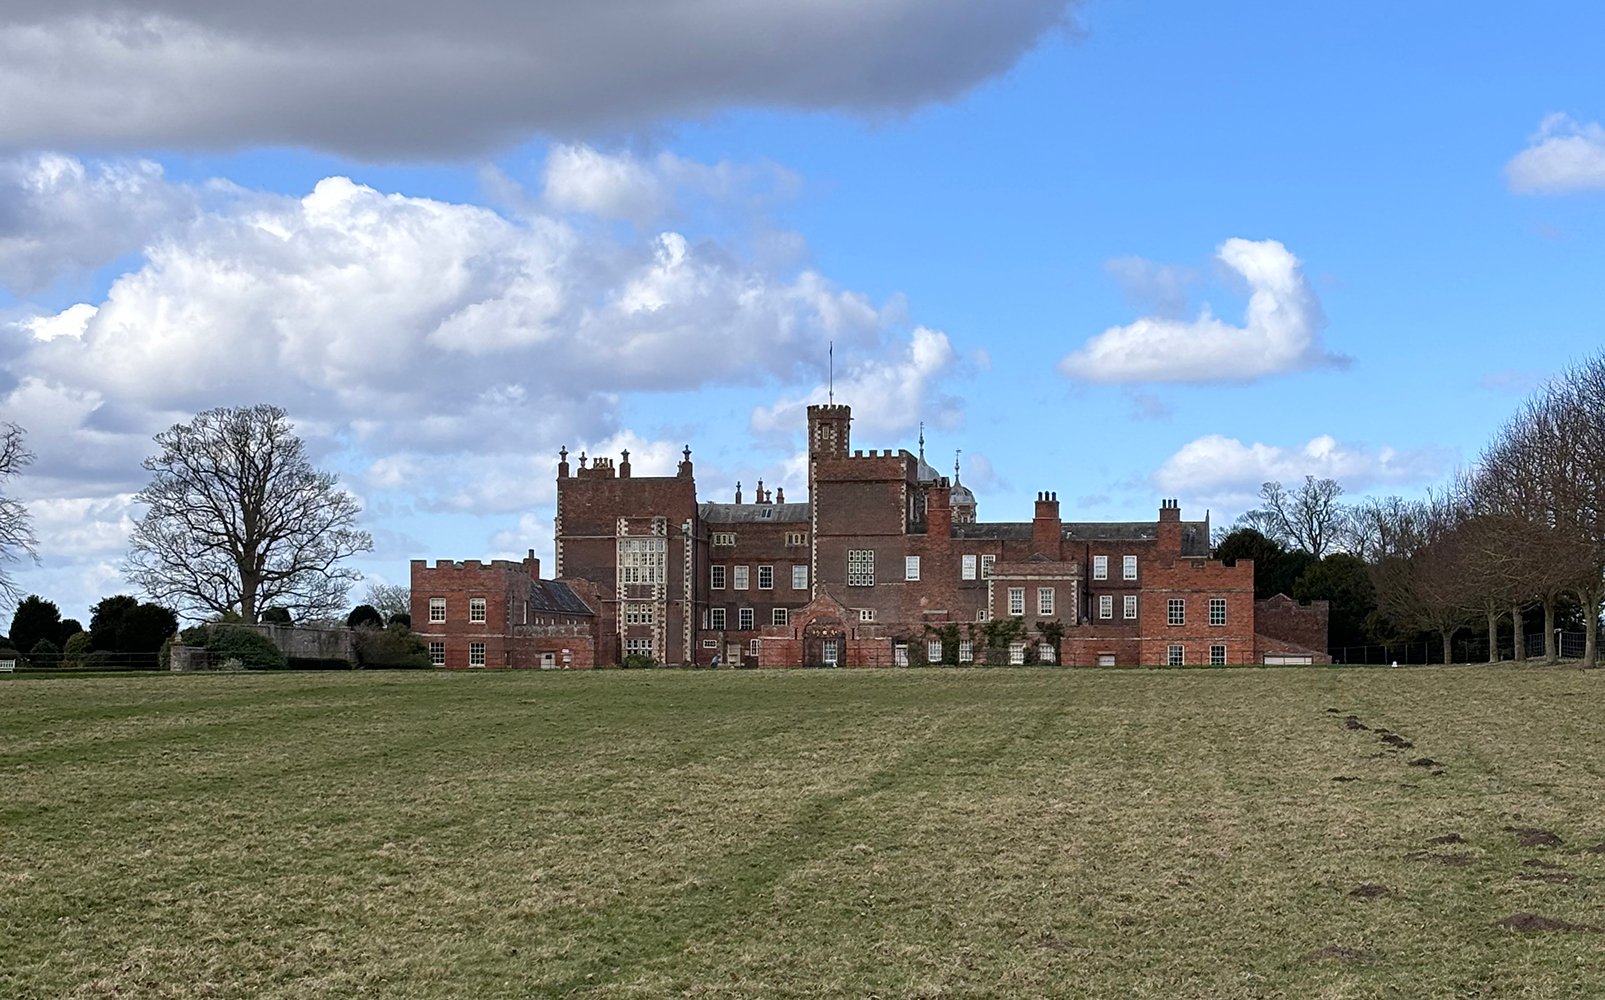 Image name burton constable hall red bricks blue sky and clouds east yorkshire the 19 image from the post A look at the history of Burton Constable Hall, with Dr Emma Wells in Yorkshire.com.